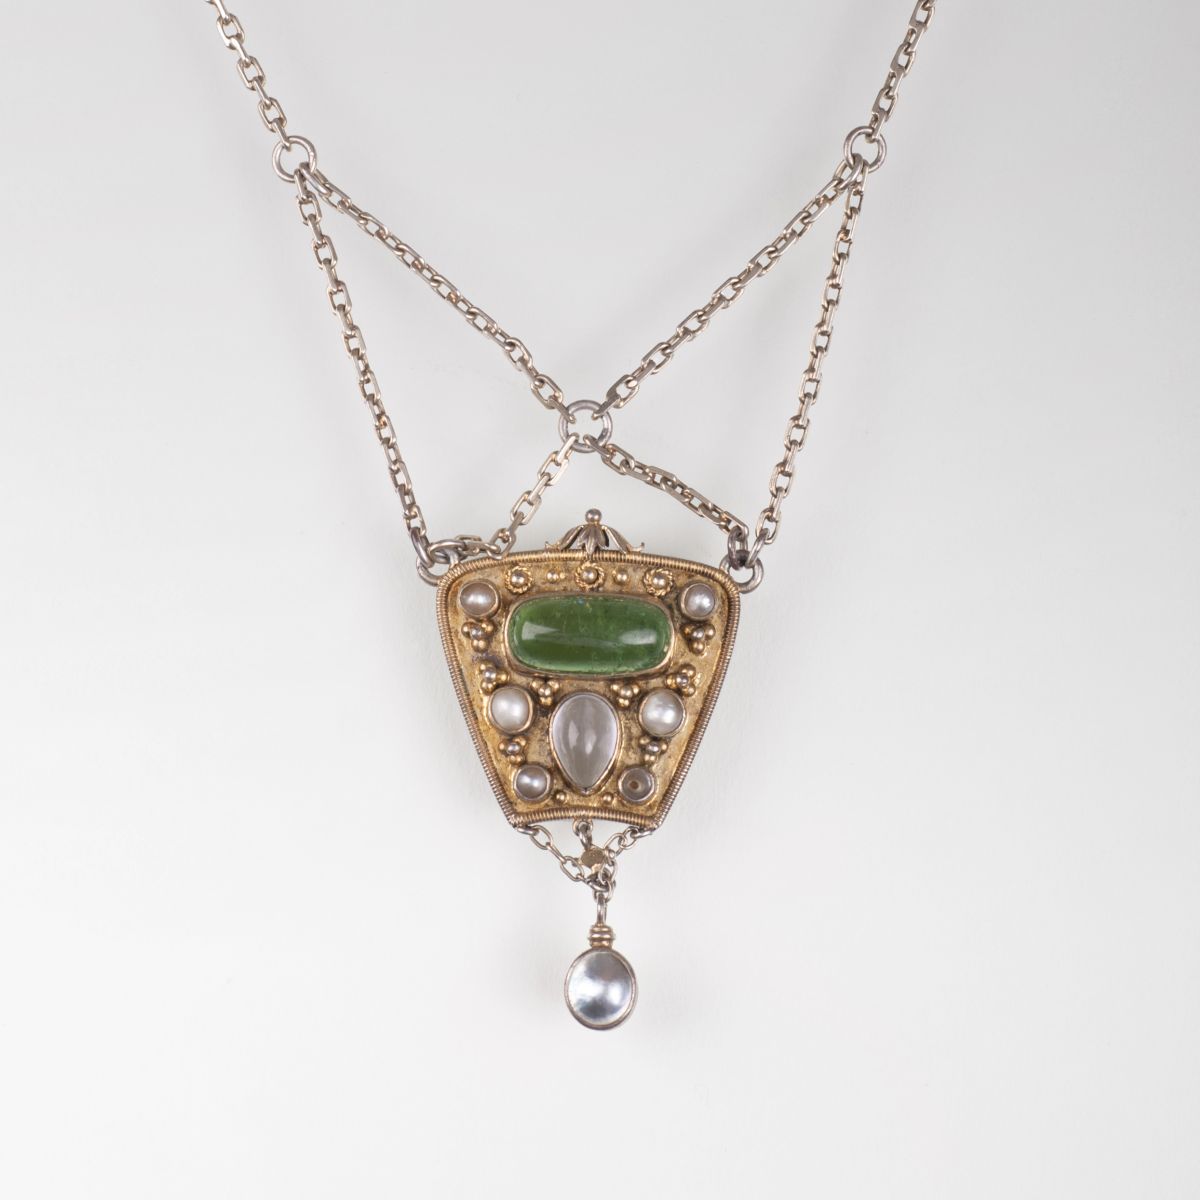 An art nouveau gemstone necklace with pearls